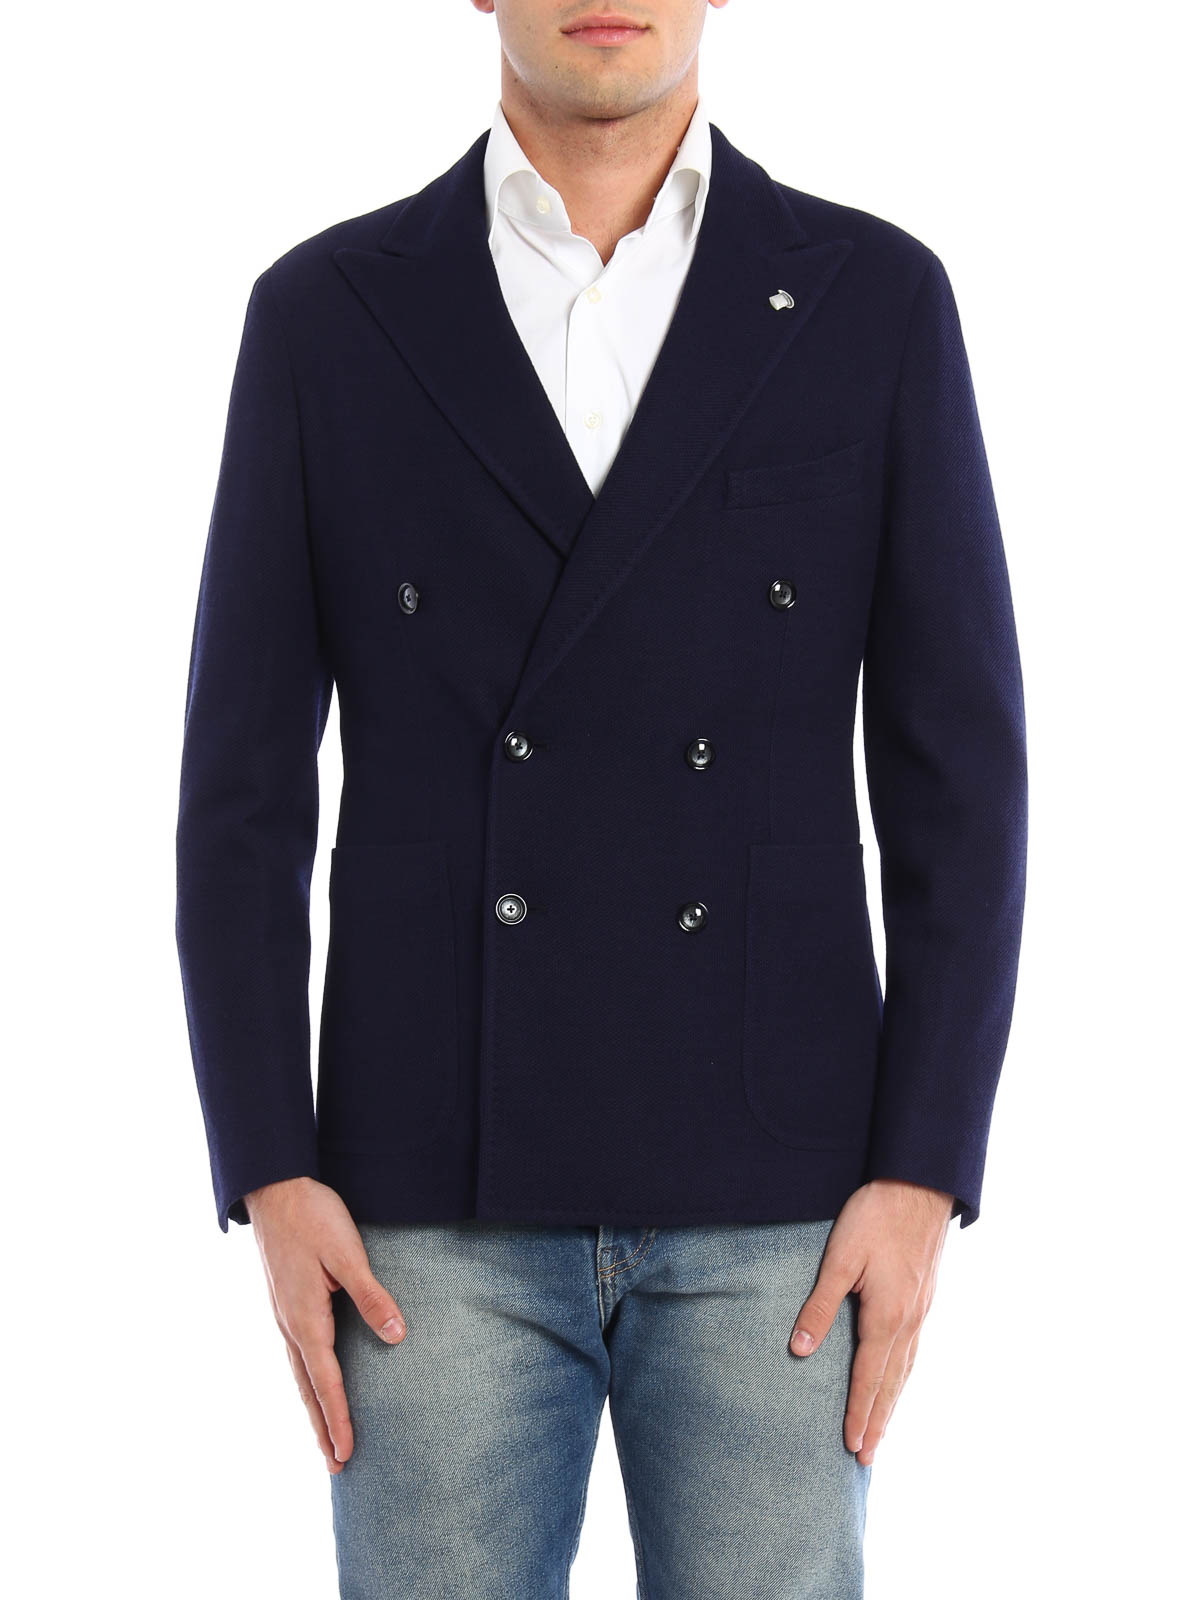 Unstructured double-breasted blazer by Tagliatore - blazers | Shop ...